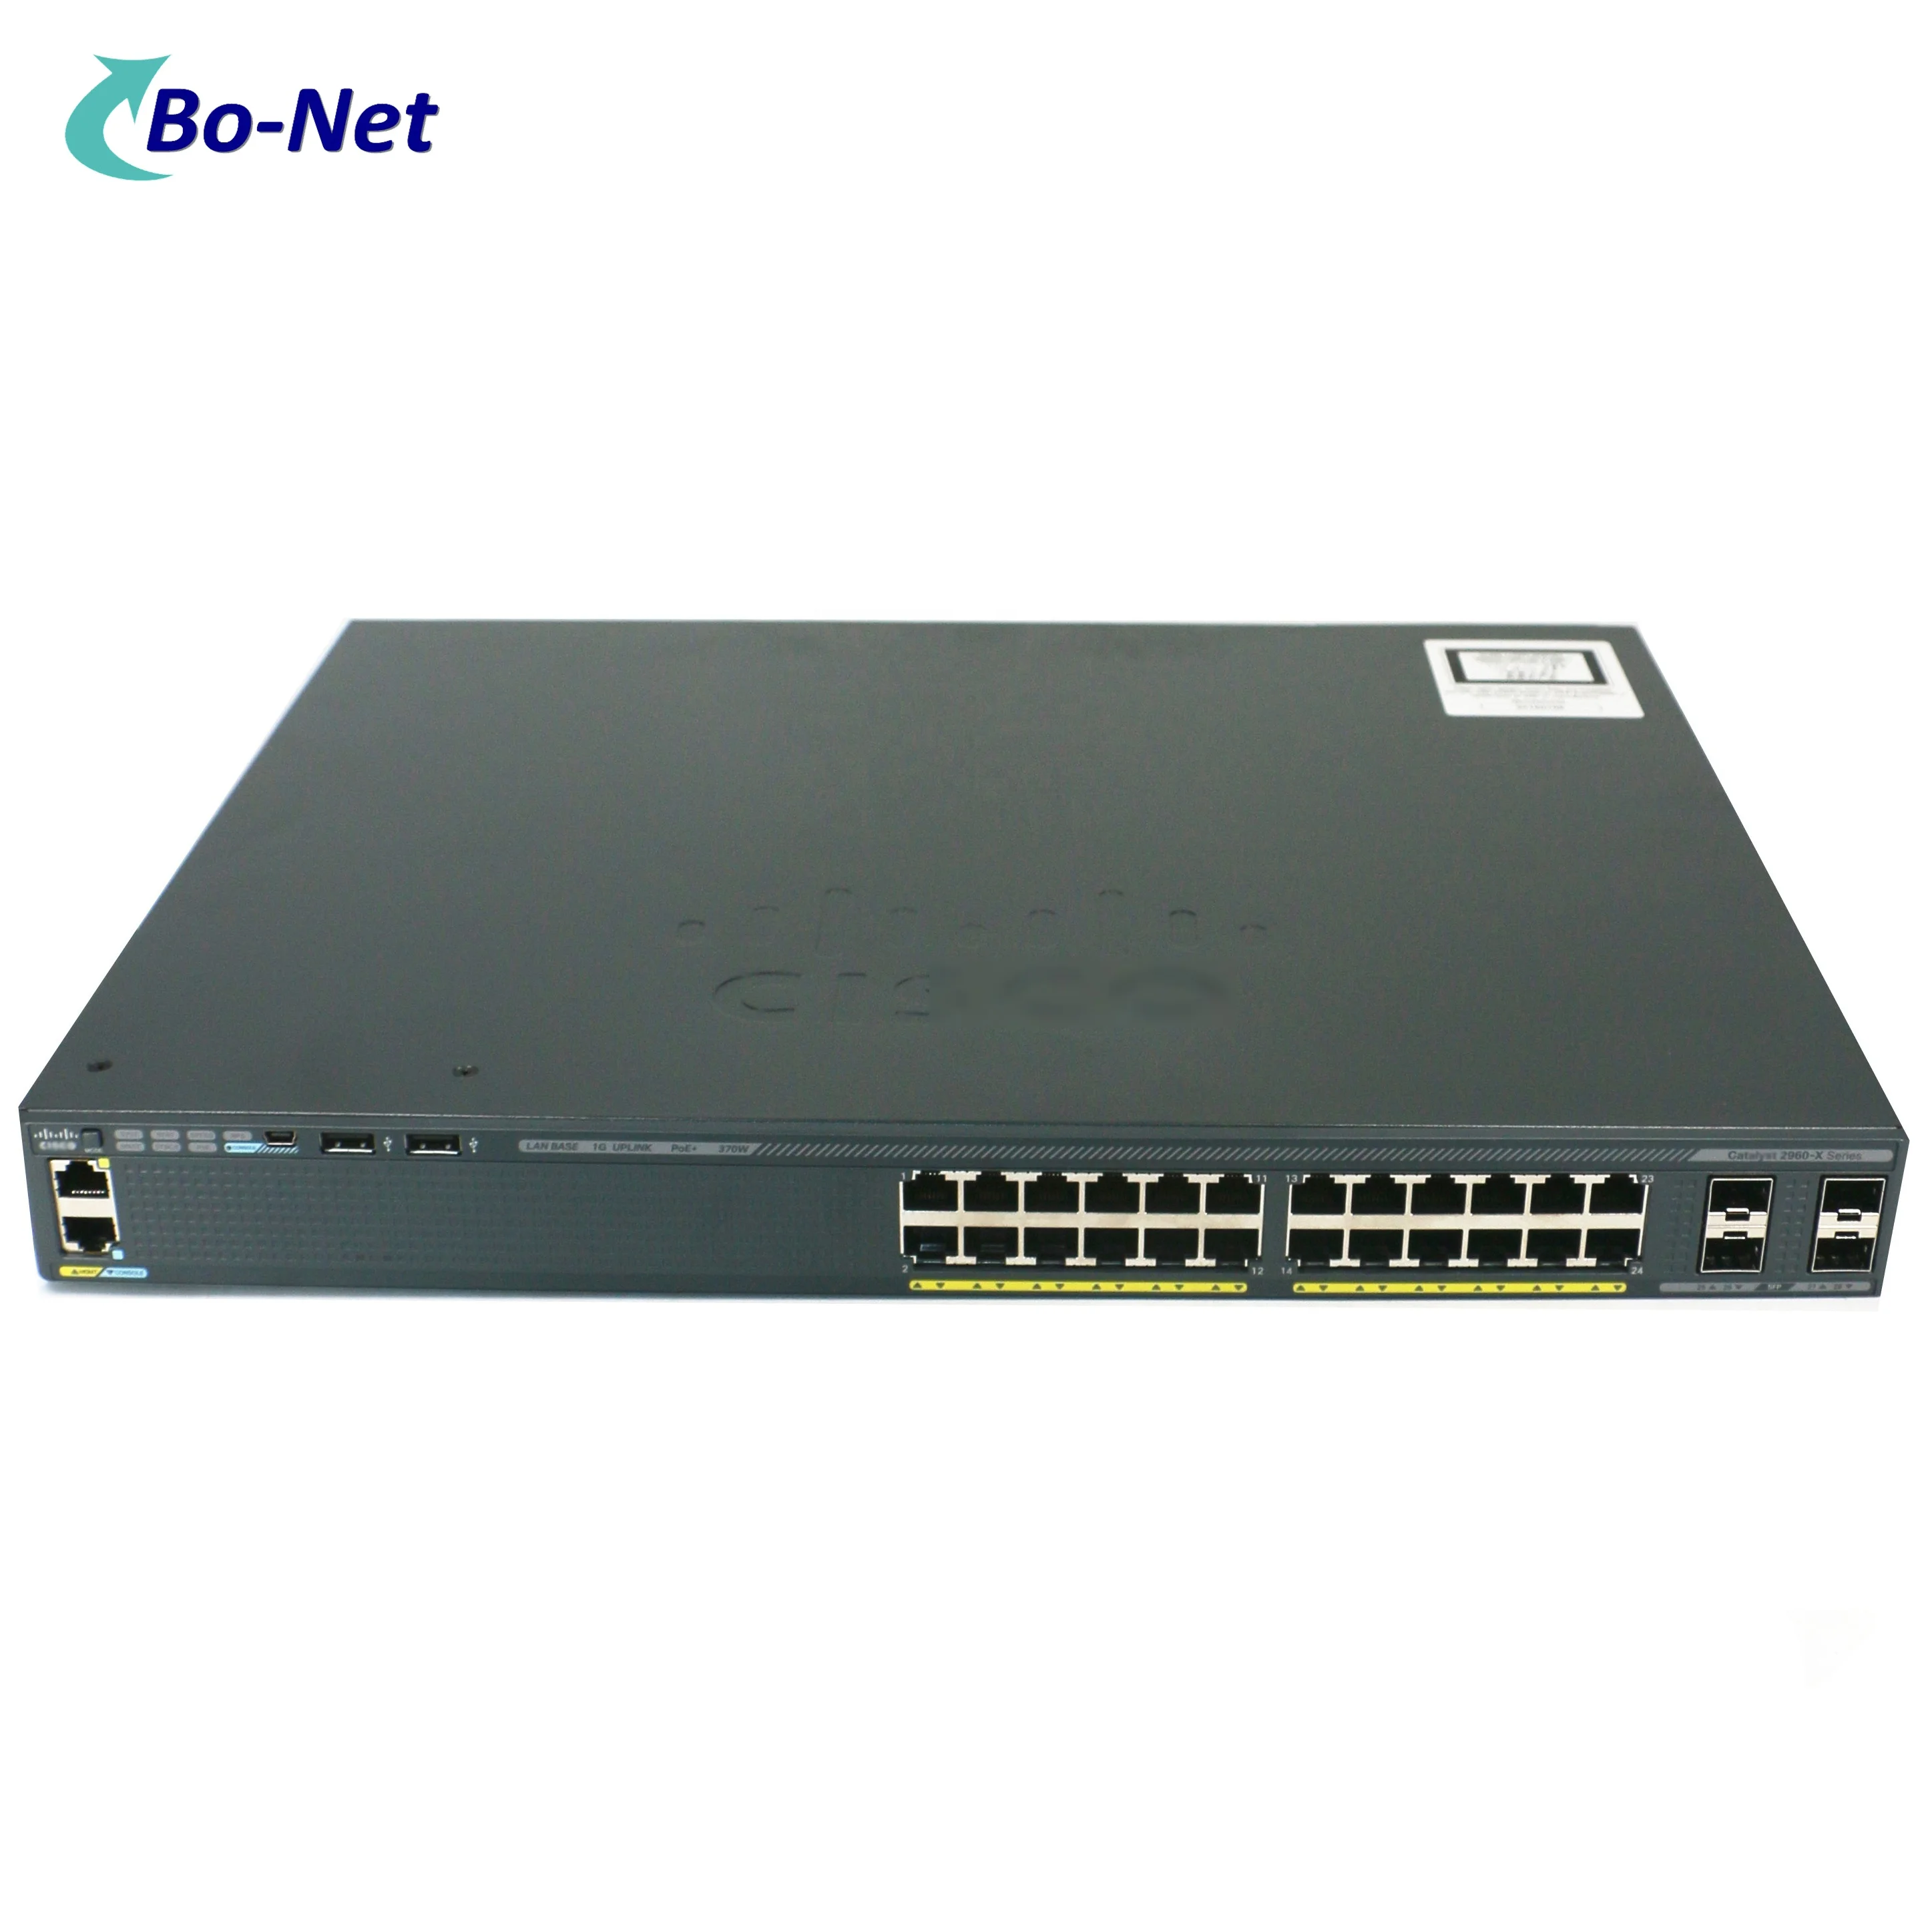 CIS CO WS-C2960X-24PS-L 24port 10/100/1000M POE switch managed network switch C2960X series original brand new sealed